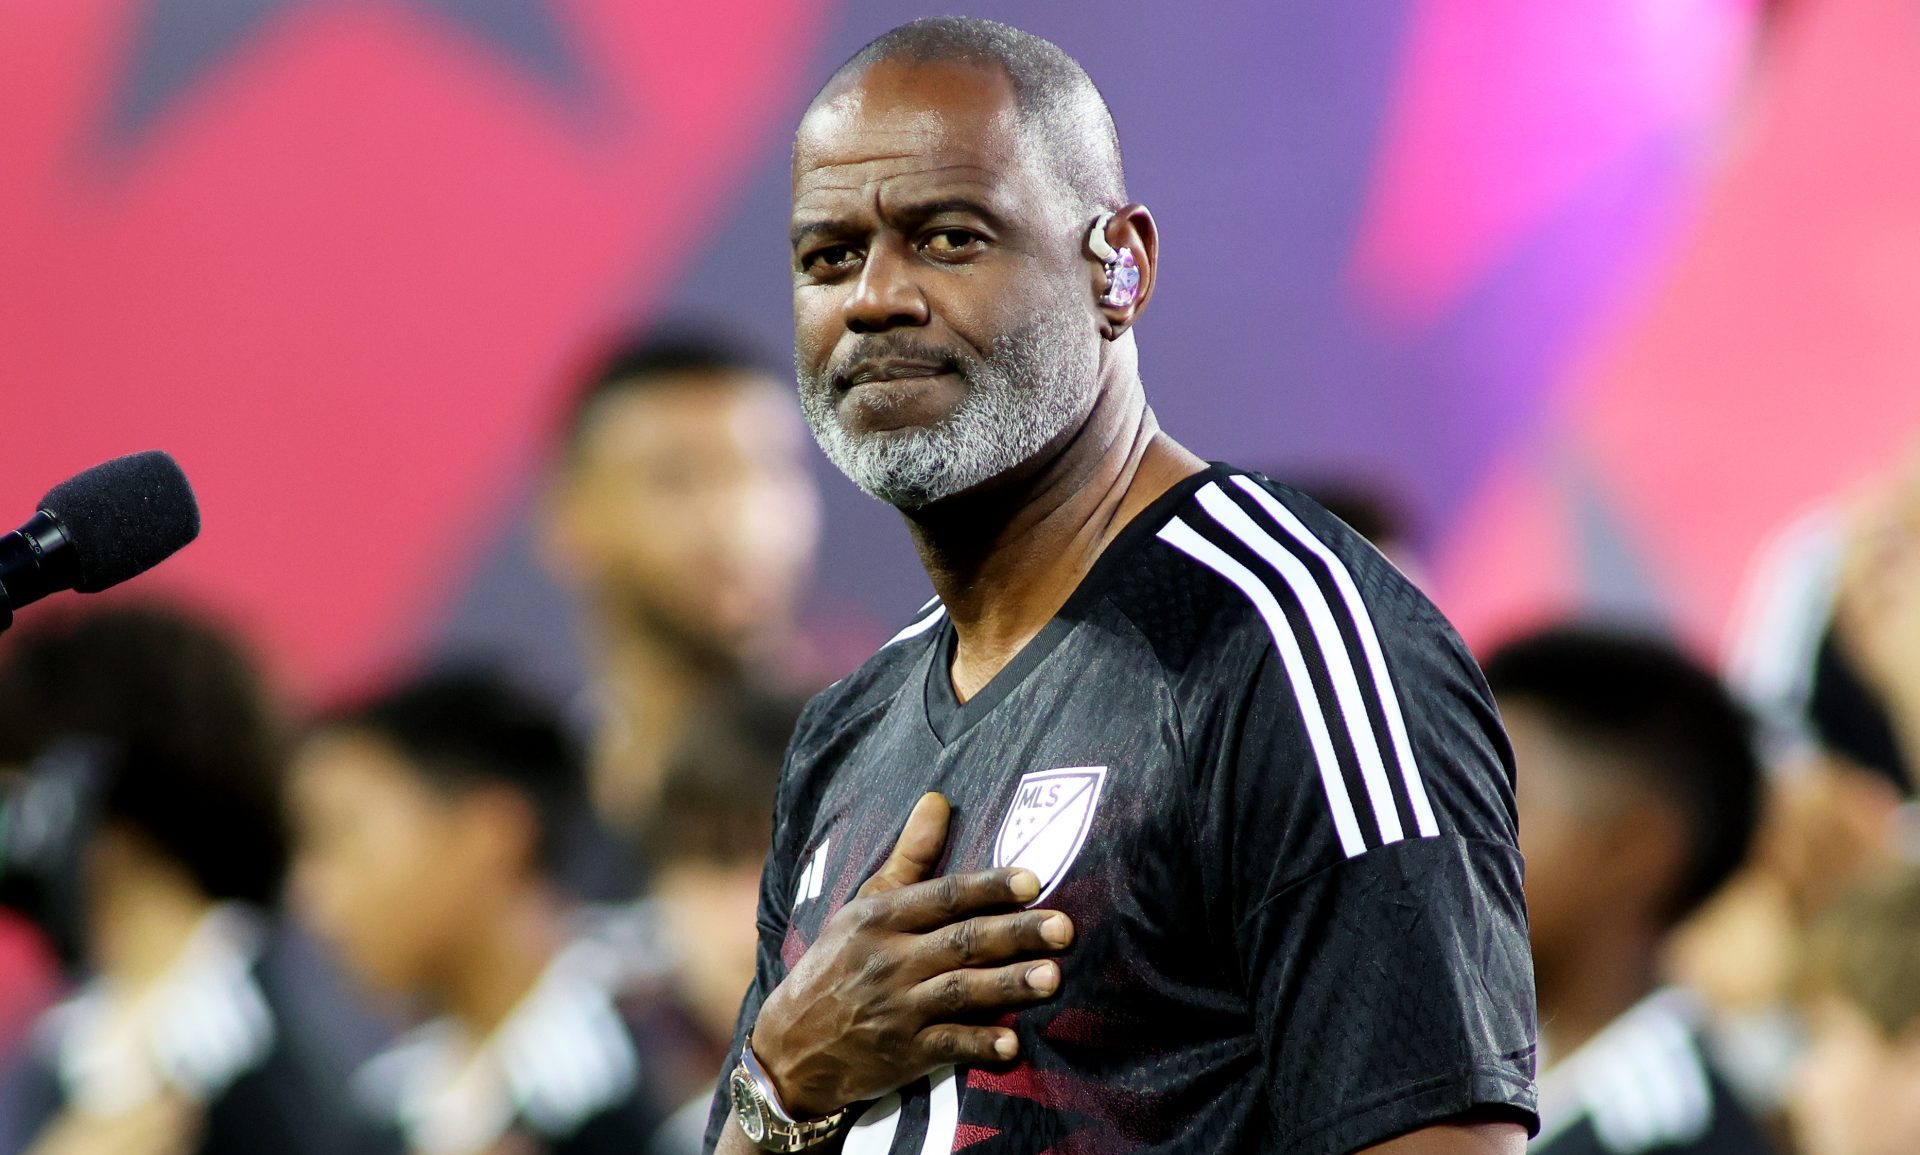 Whew! Watch Brian McKnight’s Spicy Reaction To THIS Comment About His Biological Kids